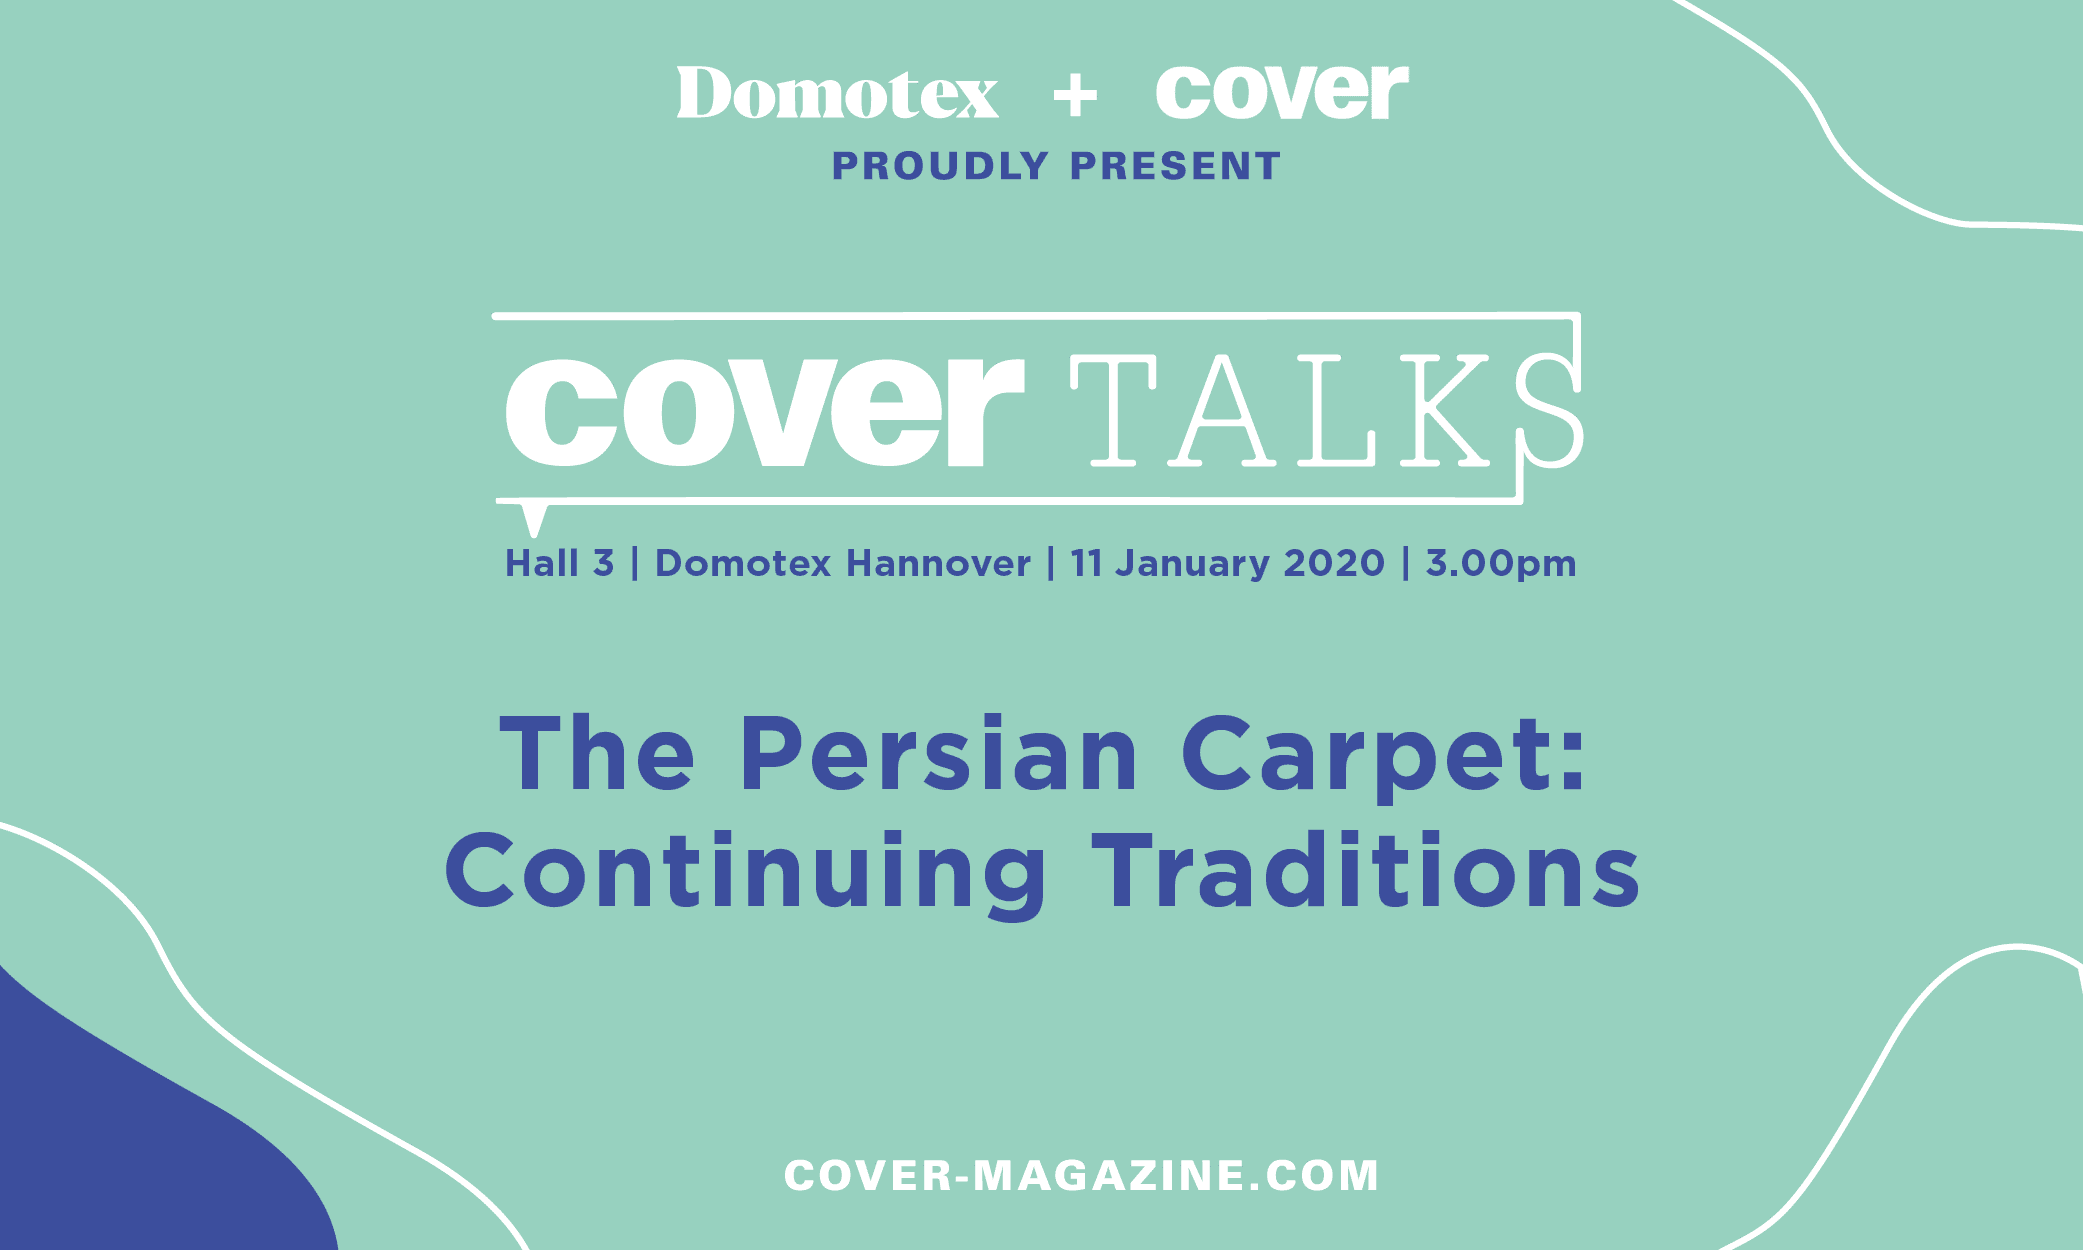 The Persian Carpet: Continuing Traditions, Saturday 11 January, 3.00pm